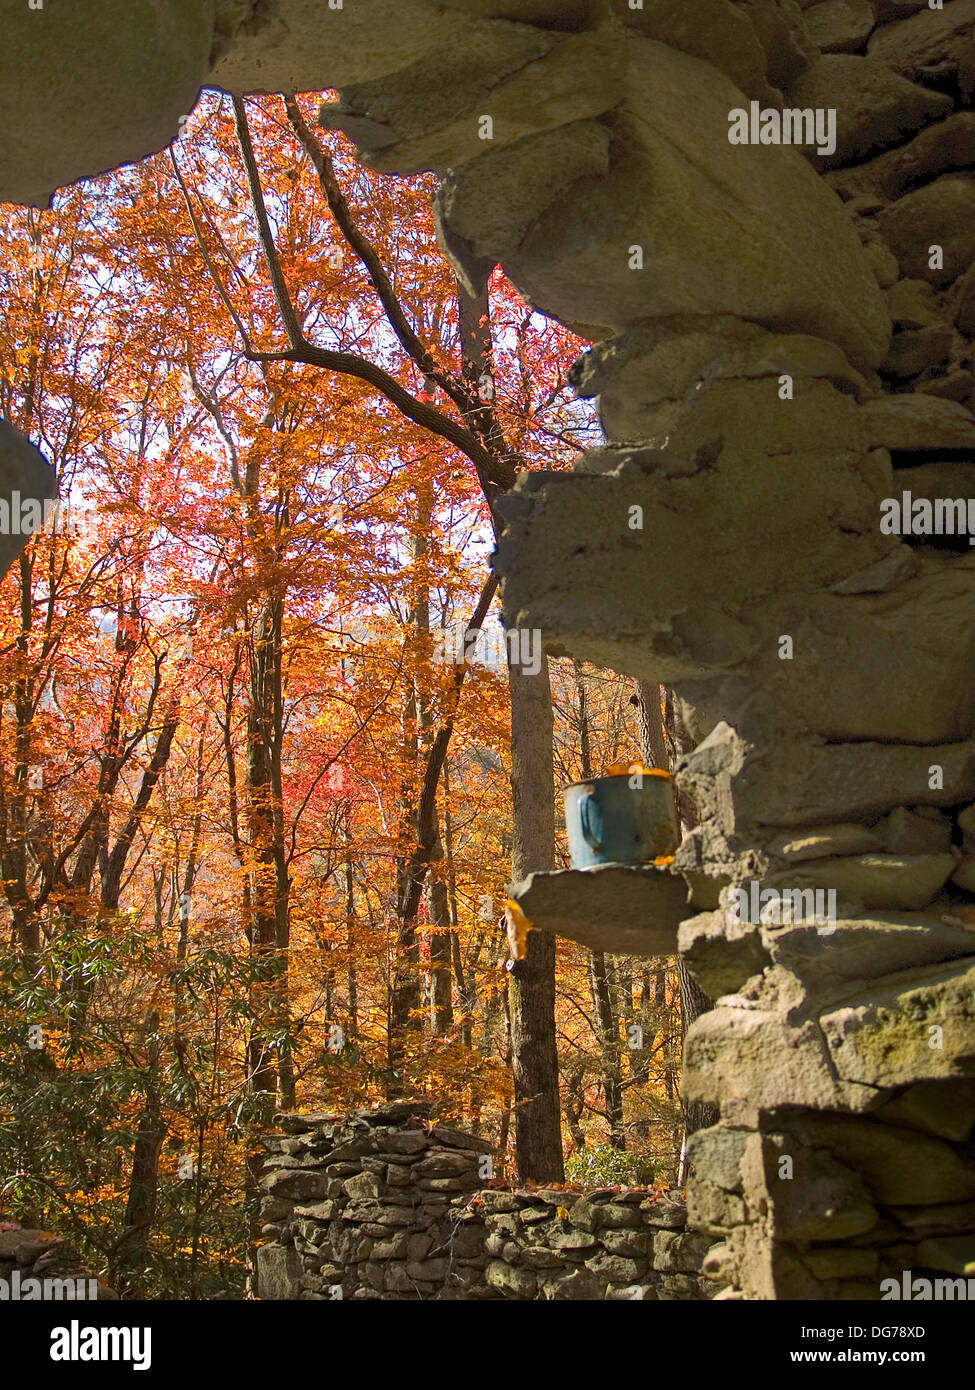 A coffee cup in abandoned ruins,Great Smoky Mountain National Park,Tennessee Stock Photo